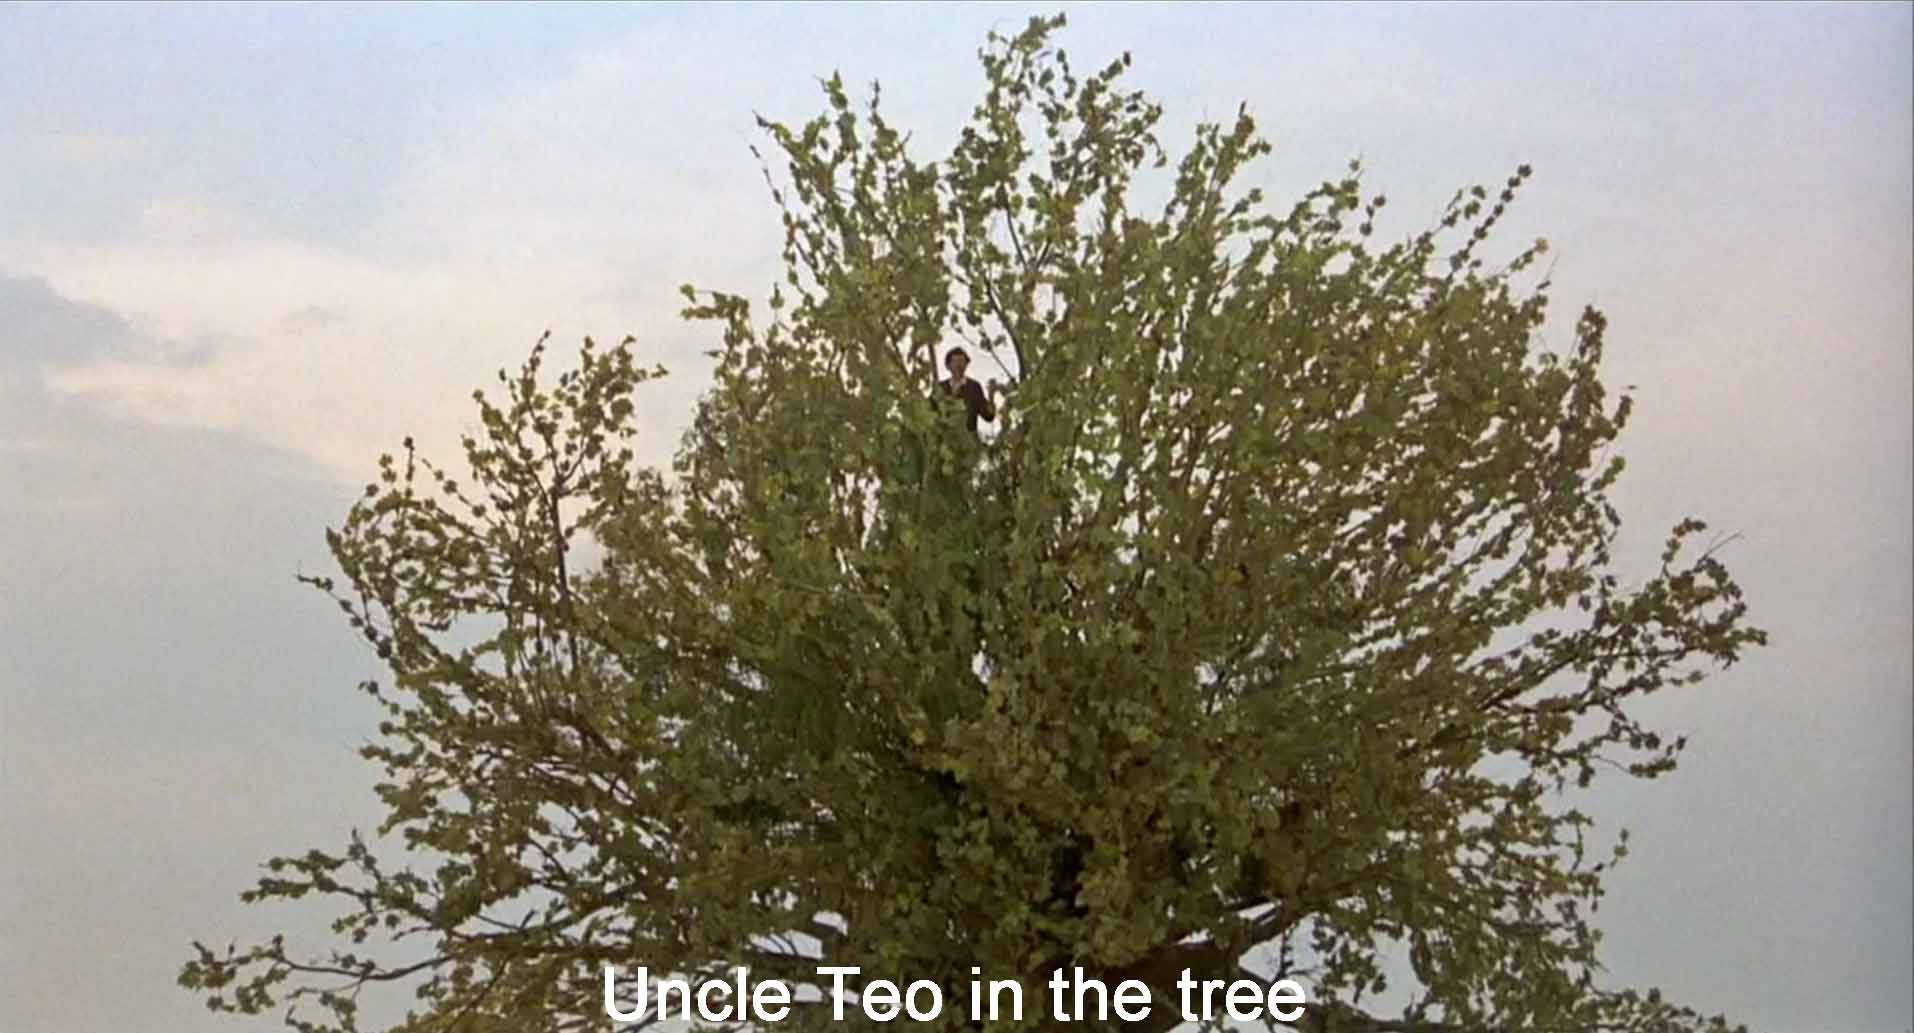 Uncle Teo in the tree